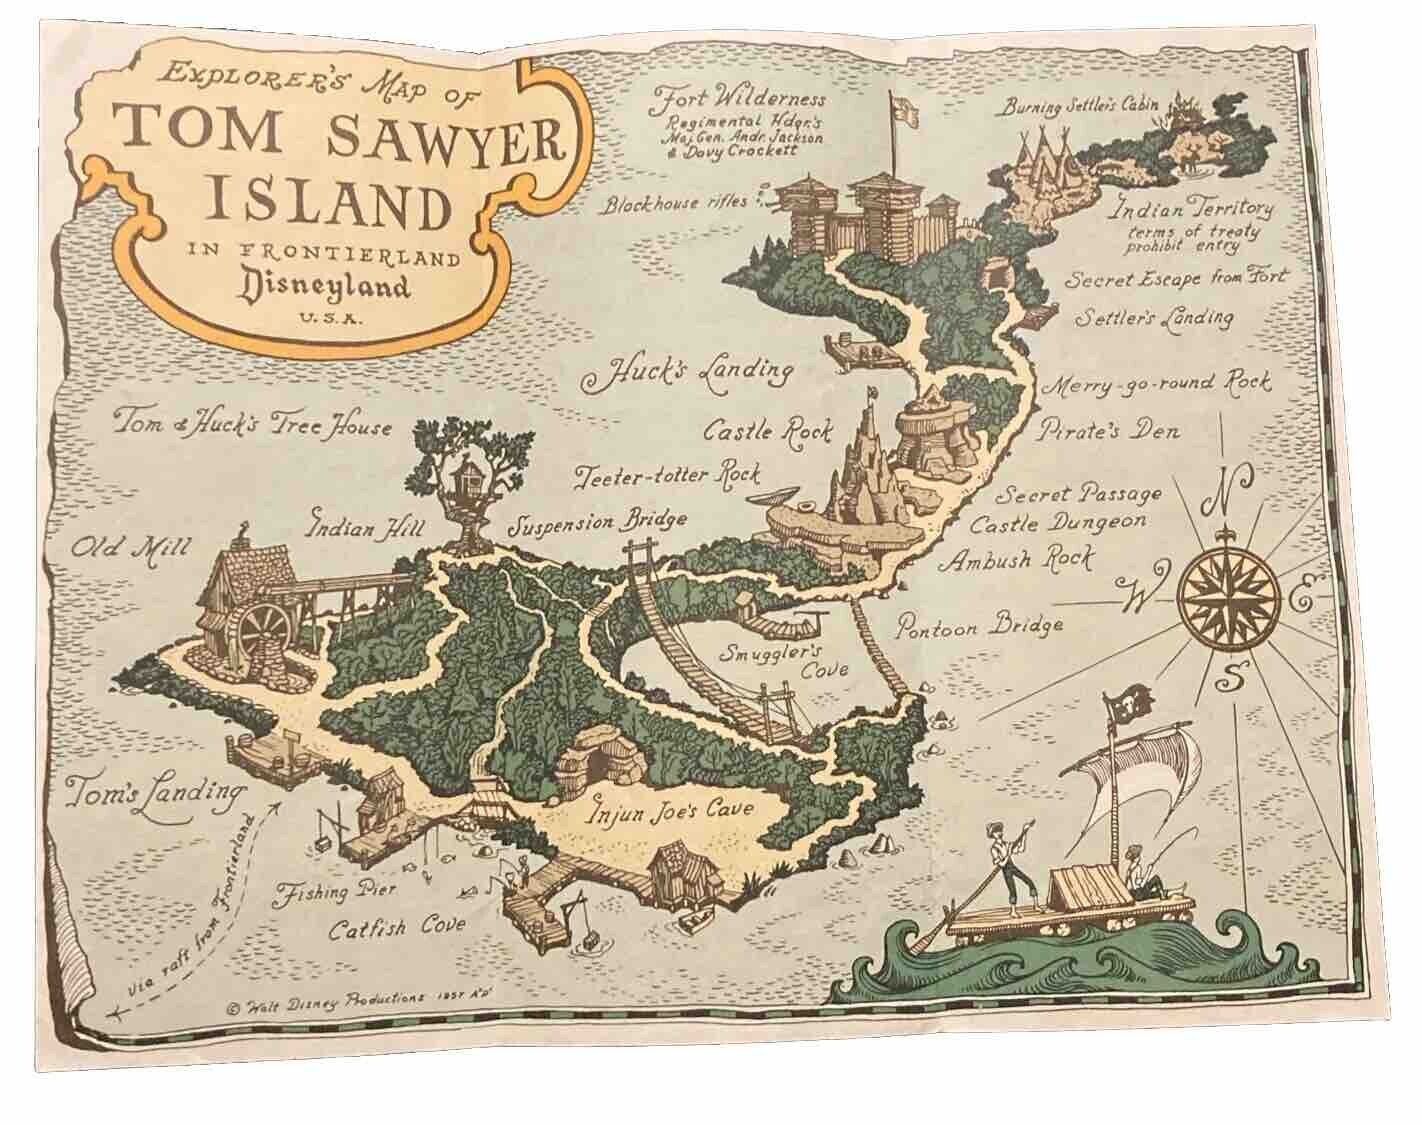 Explorers map of Tom Sawyer Island pictorial map Disneyland 1957 Smugglers Cove